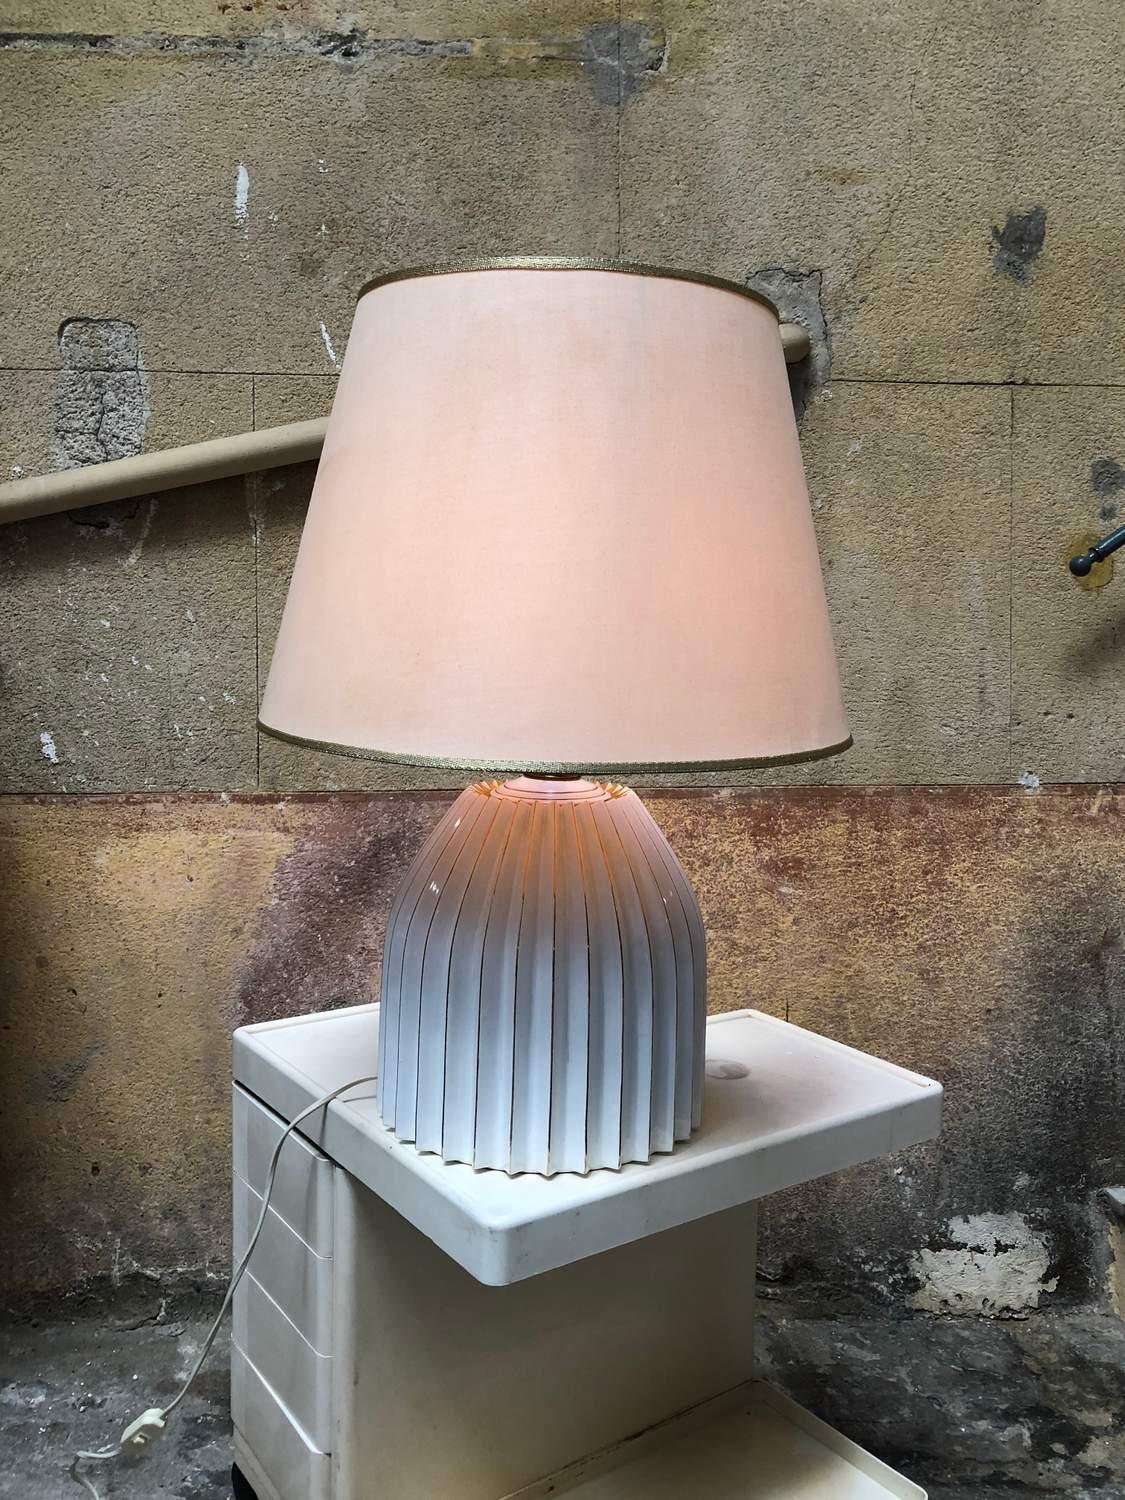 1970s Italian ceramic table light attributed to Tommaso Barbi. Sold with lamp shade. Bullet shaped base with white glaze and gold decor.

Details
Creator: Attributed Tommaso Barbi
Dimensions: Light base is 40 cm high and 34 cm diameter. Height with